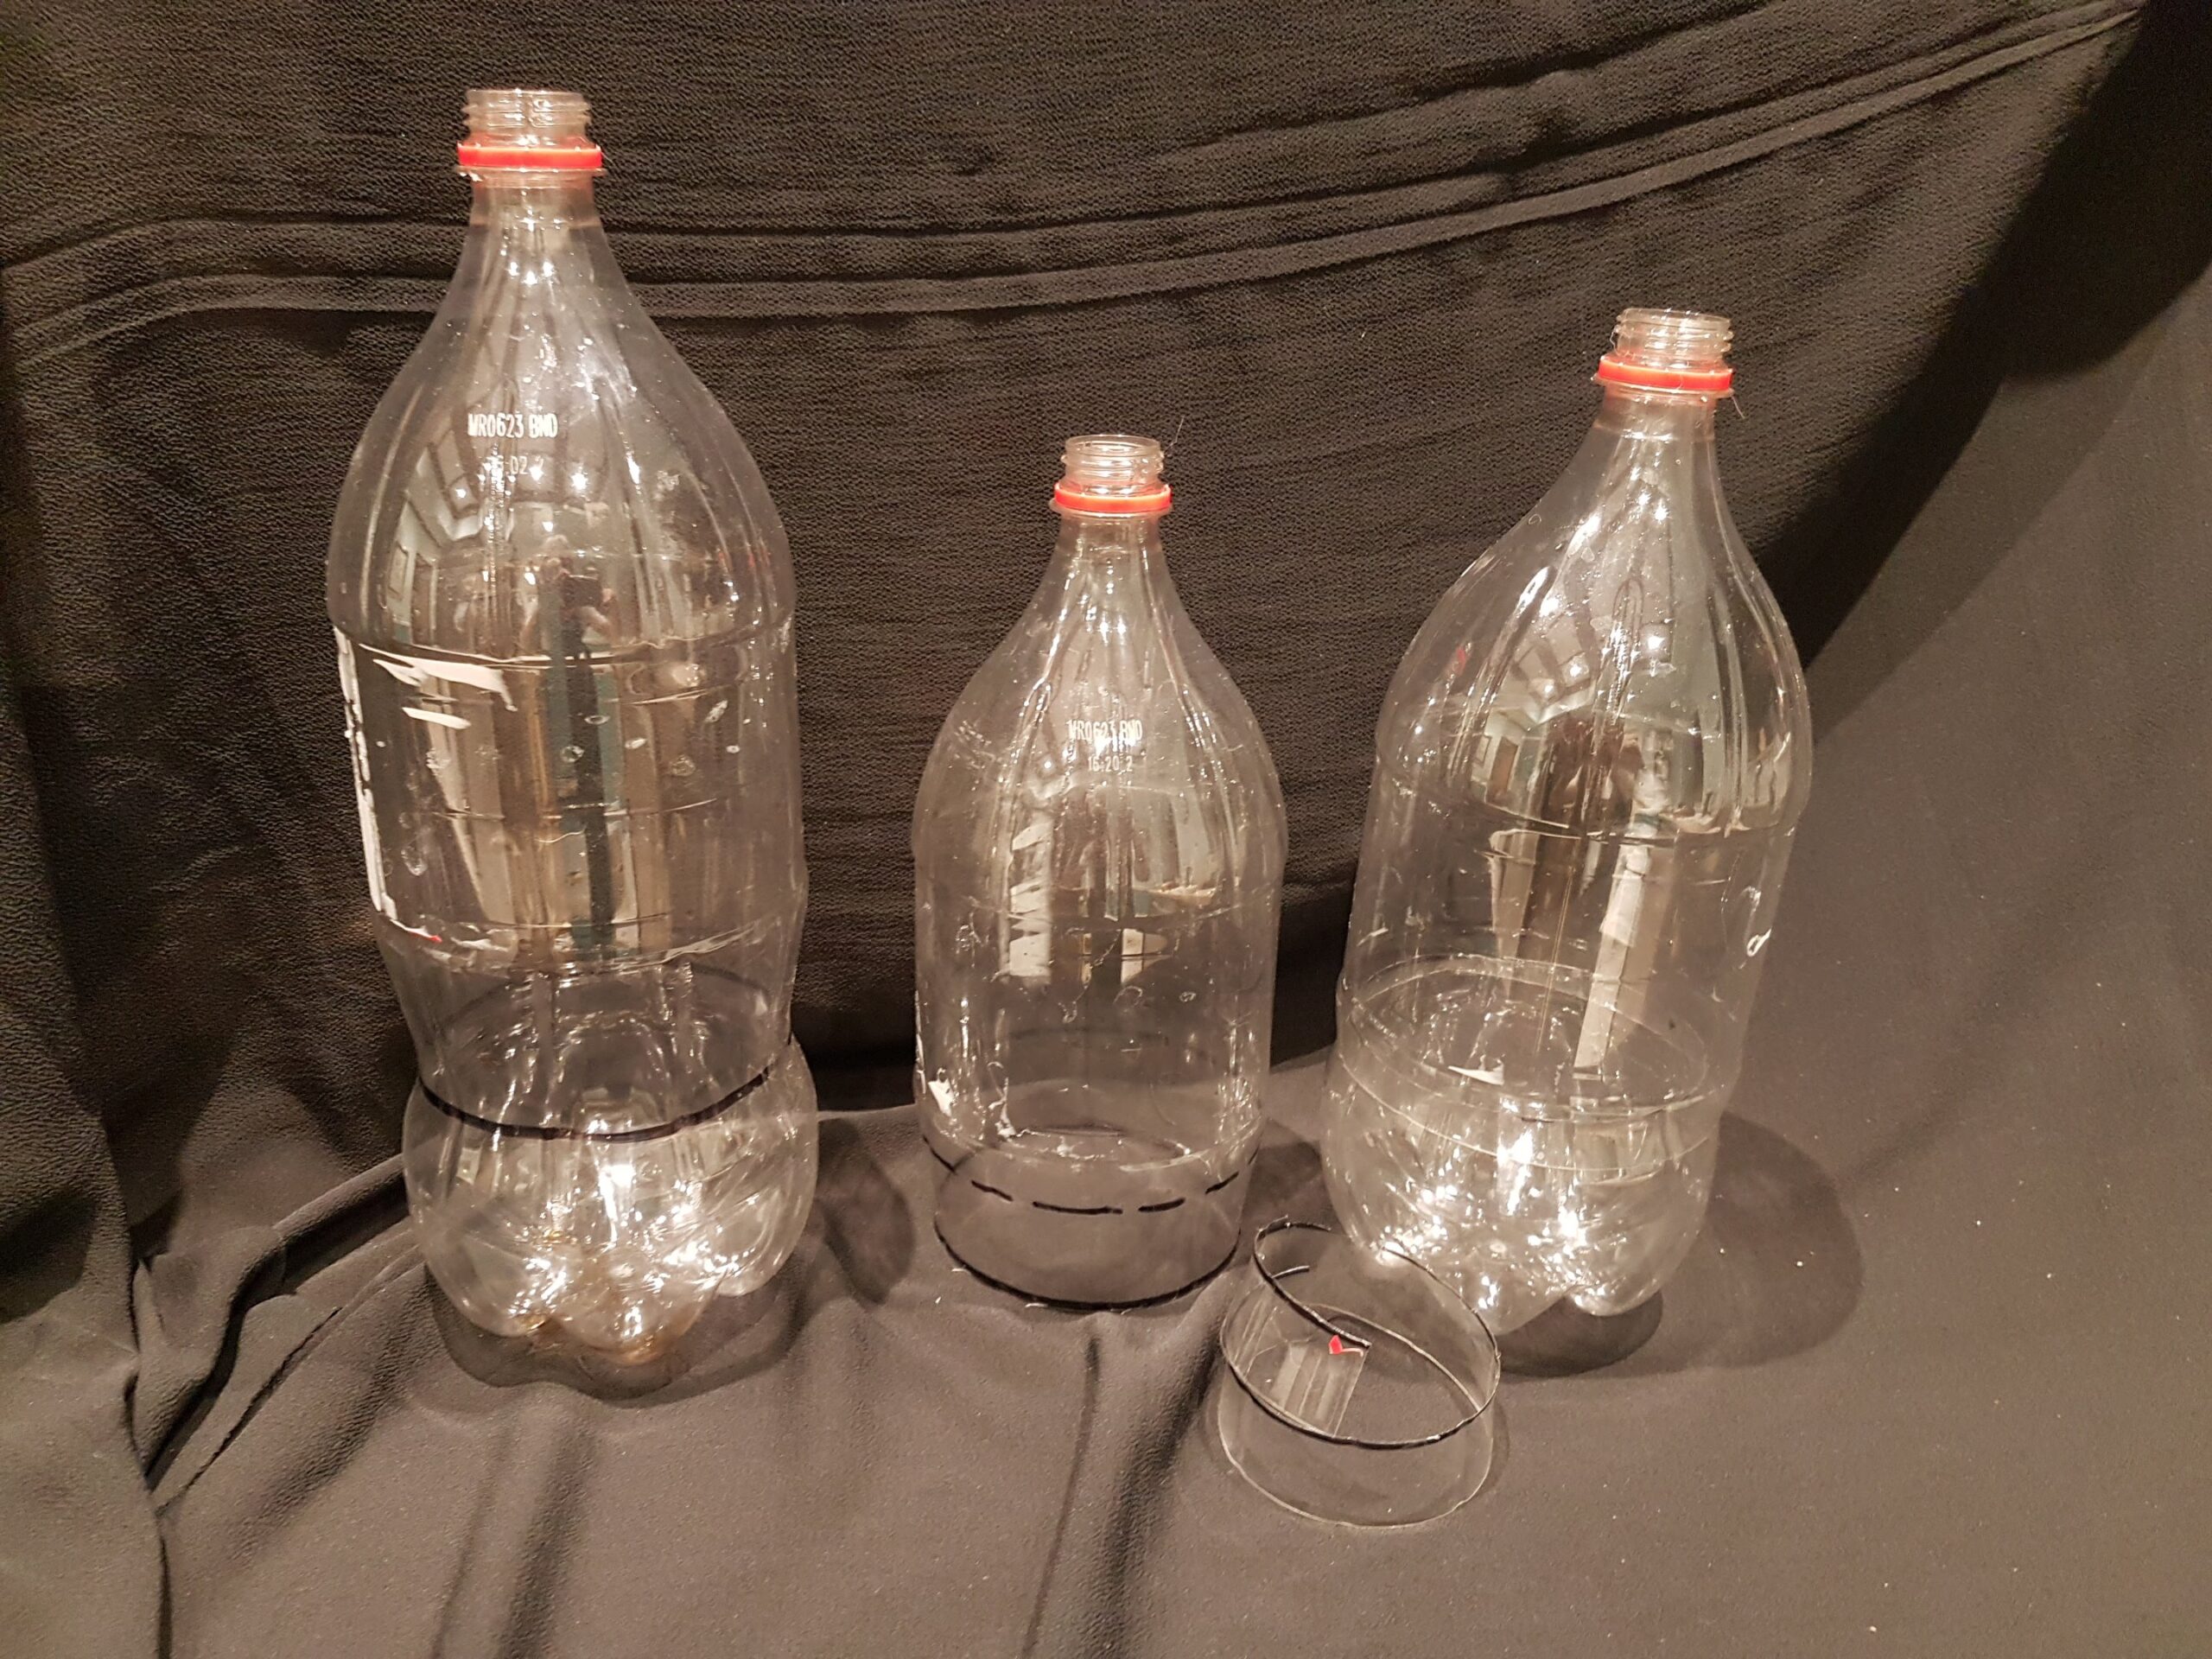 'nesting'winter sowing containers made from coke bottles.